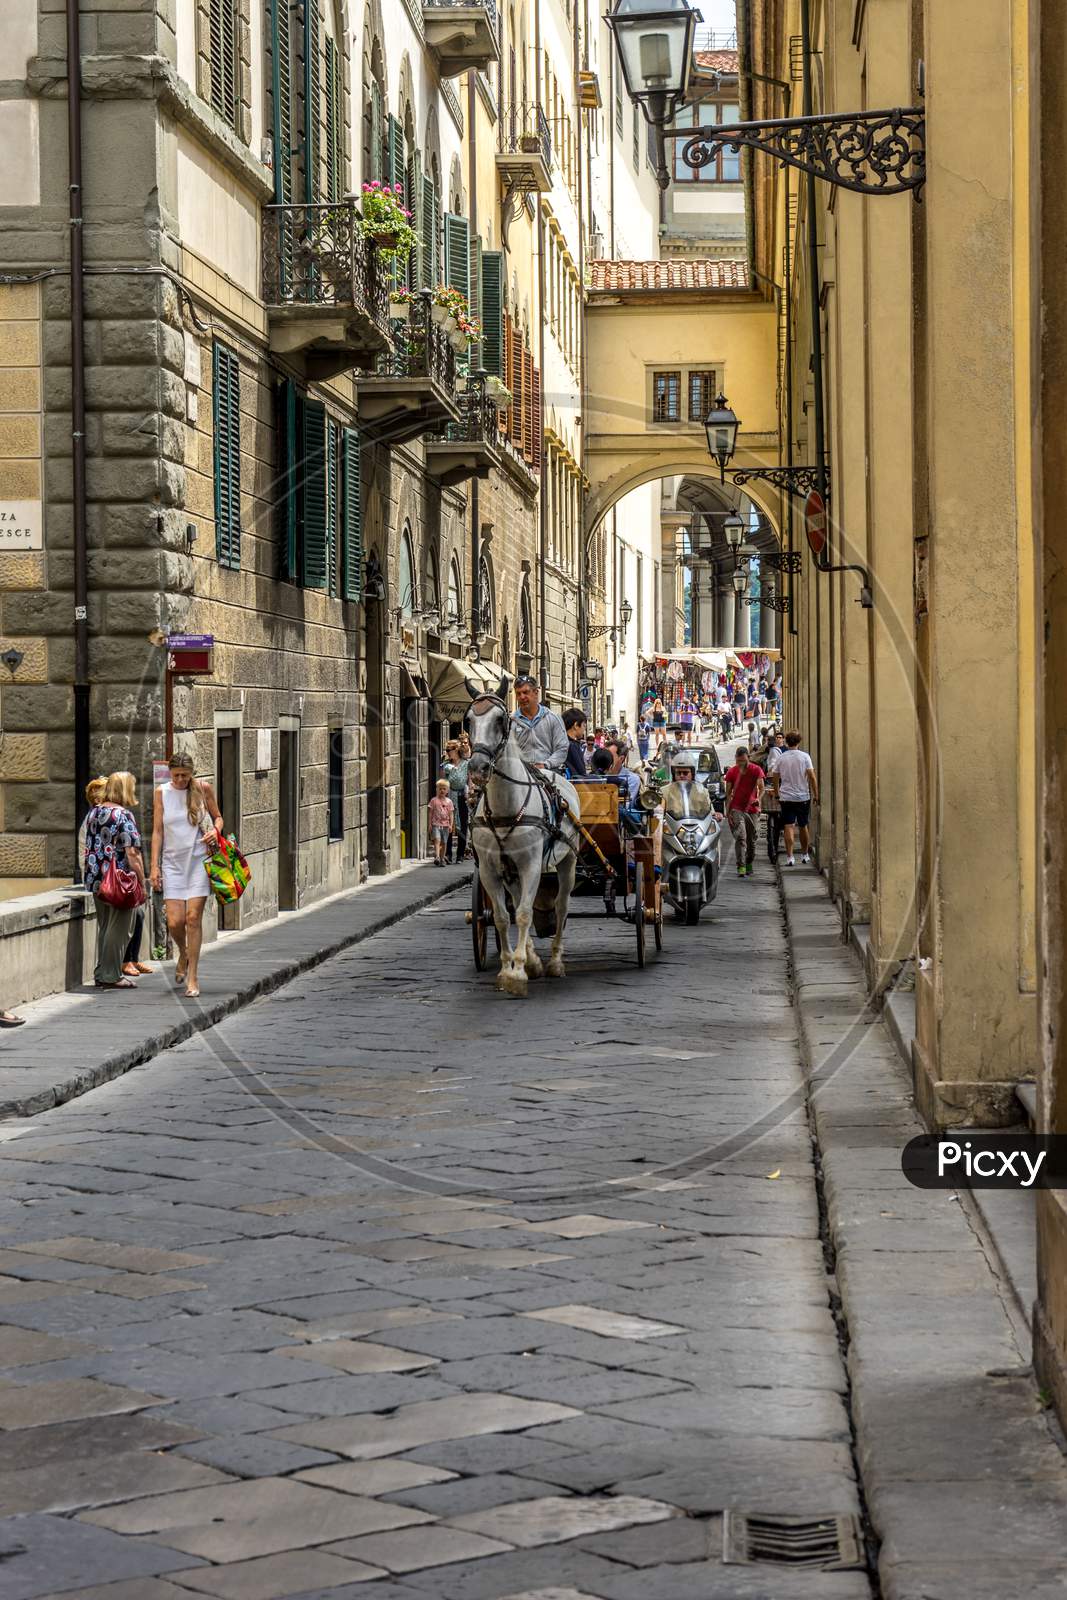 Florence, Italy - 25 June 2018: Horse Drawn Carts In The Narrow Cobblestone Street In Florence, Italy